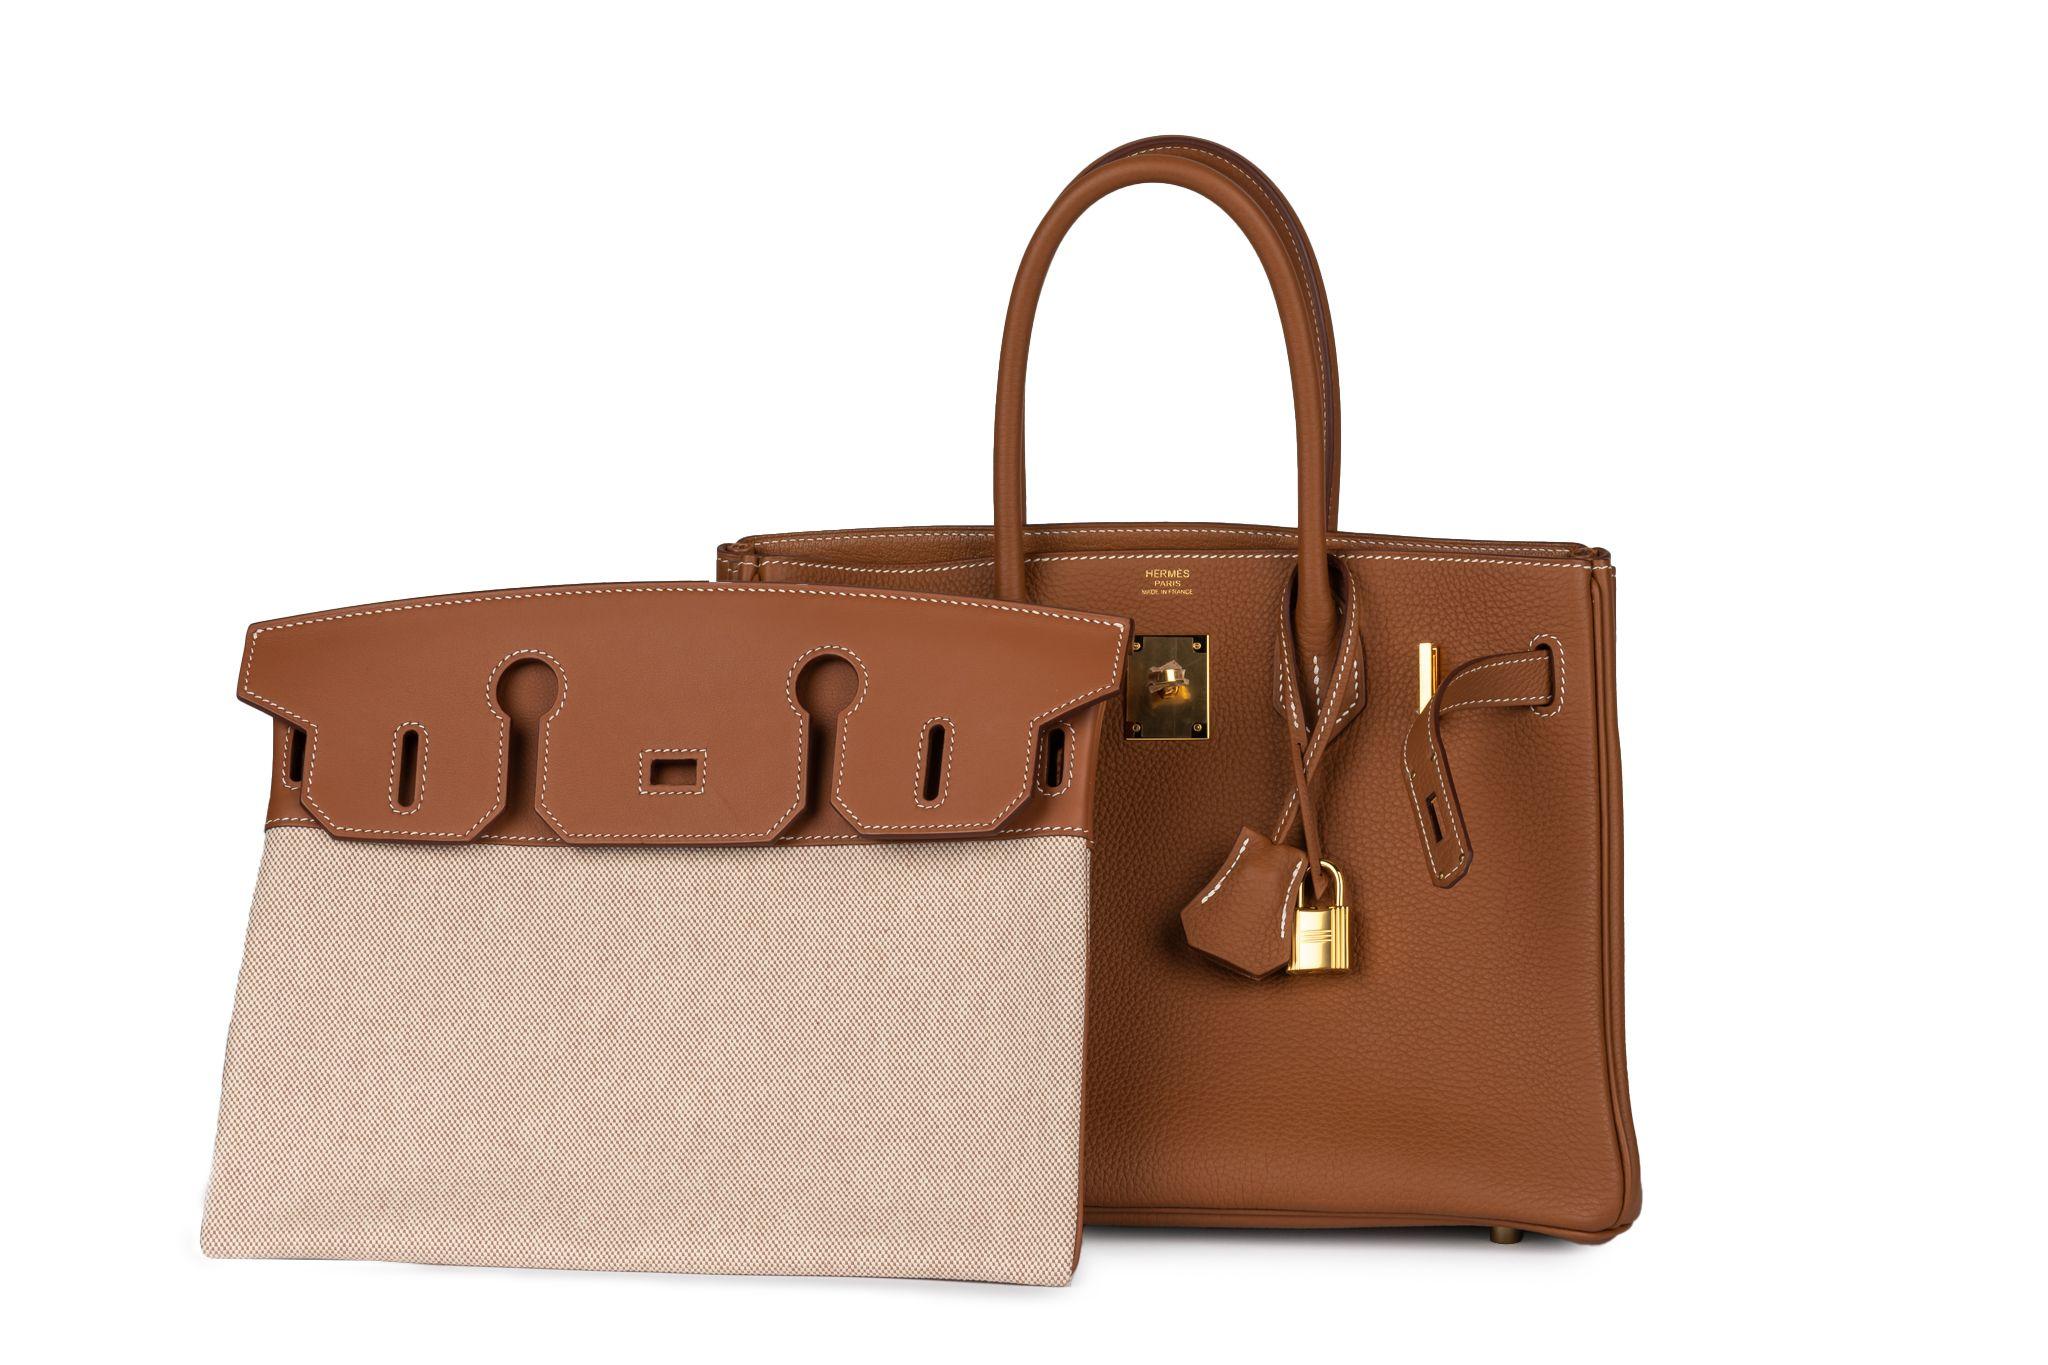 The HERMÈS Birkin 3 in 1 bag is one of the most valuable and collectible bags there is. It is absolutely stunning. This piece is in brand new condition. Date stamp U for 2023. Barenia Faubourg leather, toile and gold tone hardware. The bag comes